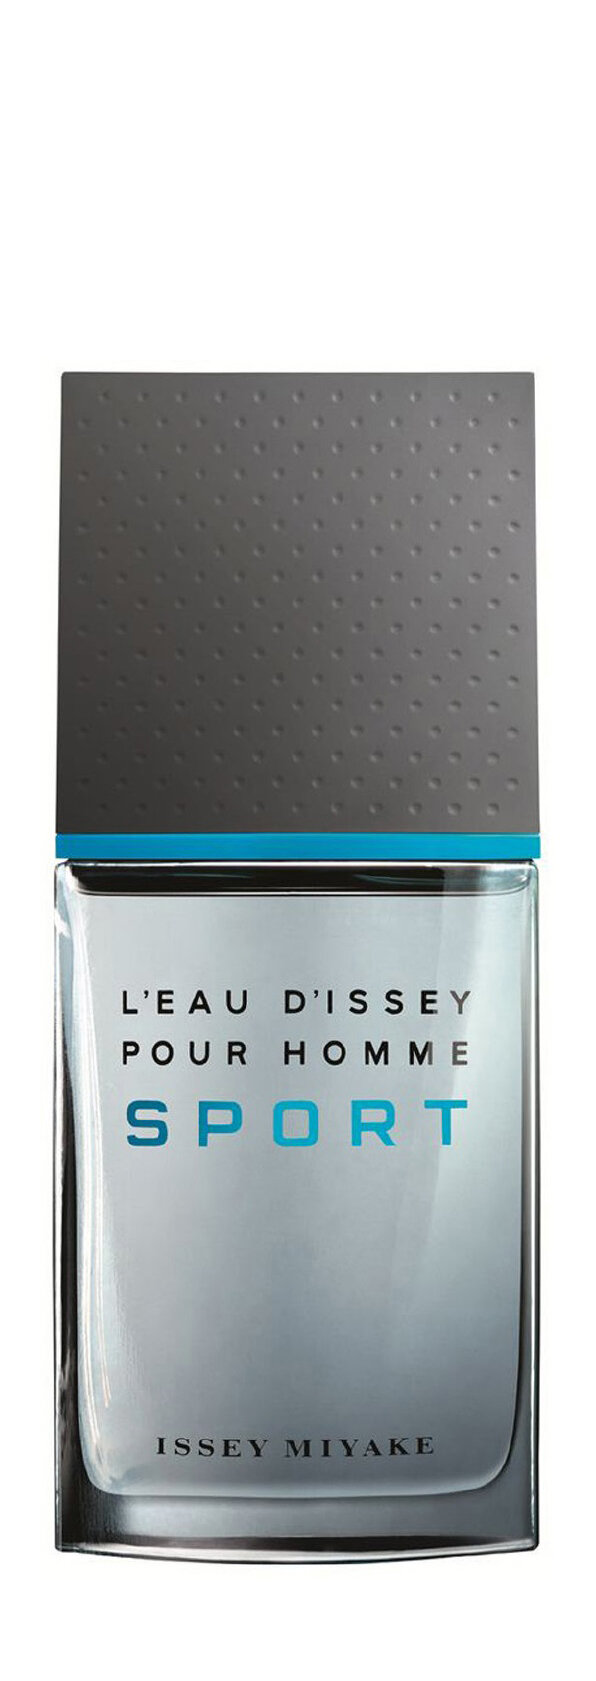 ISSEY MIYAKE L'Eau D'Issey Pour Homme Sport Туалетная вода муж, 50 мл